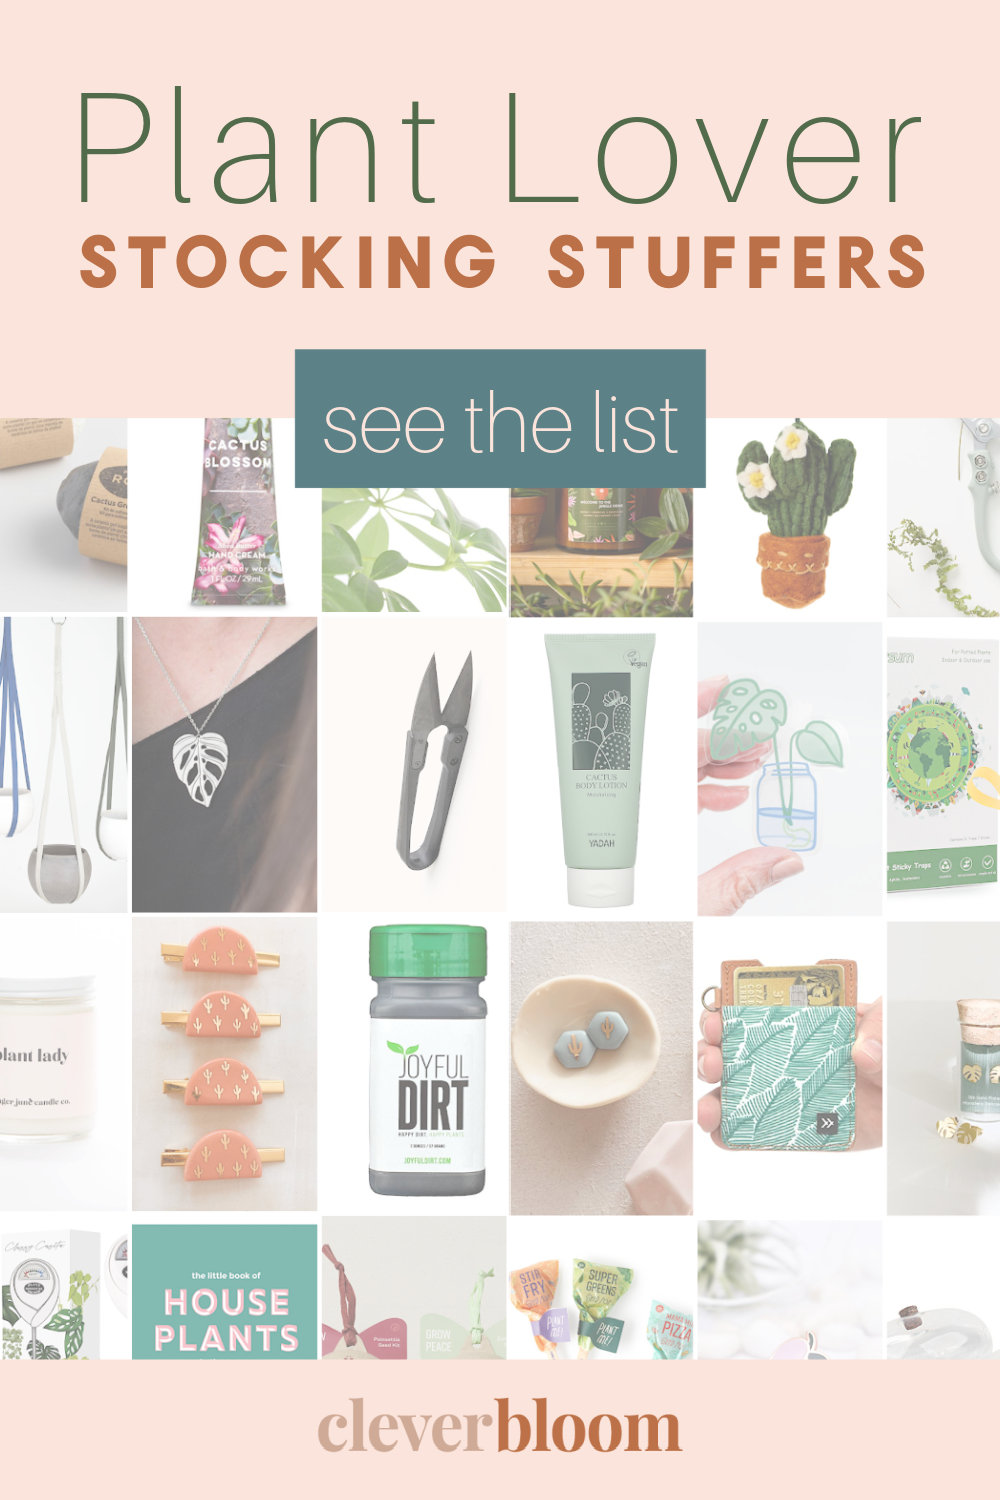 Stocking Stuffers for Plant Lovers - Images of stocking stuffer ideas.